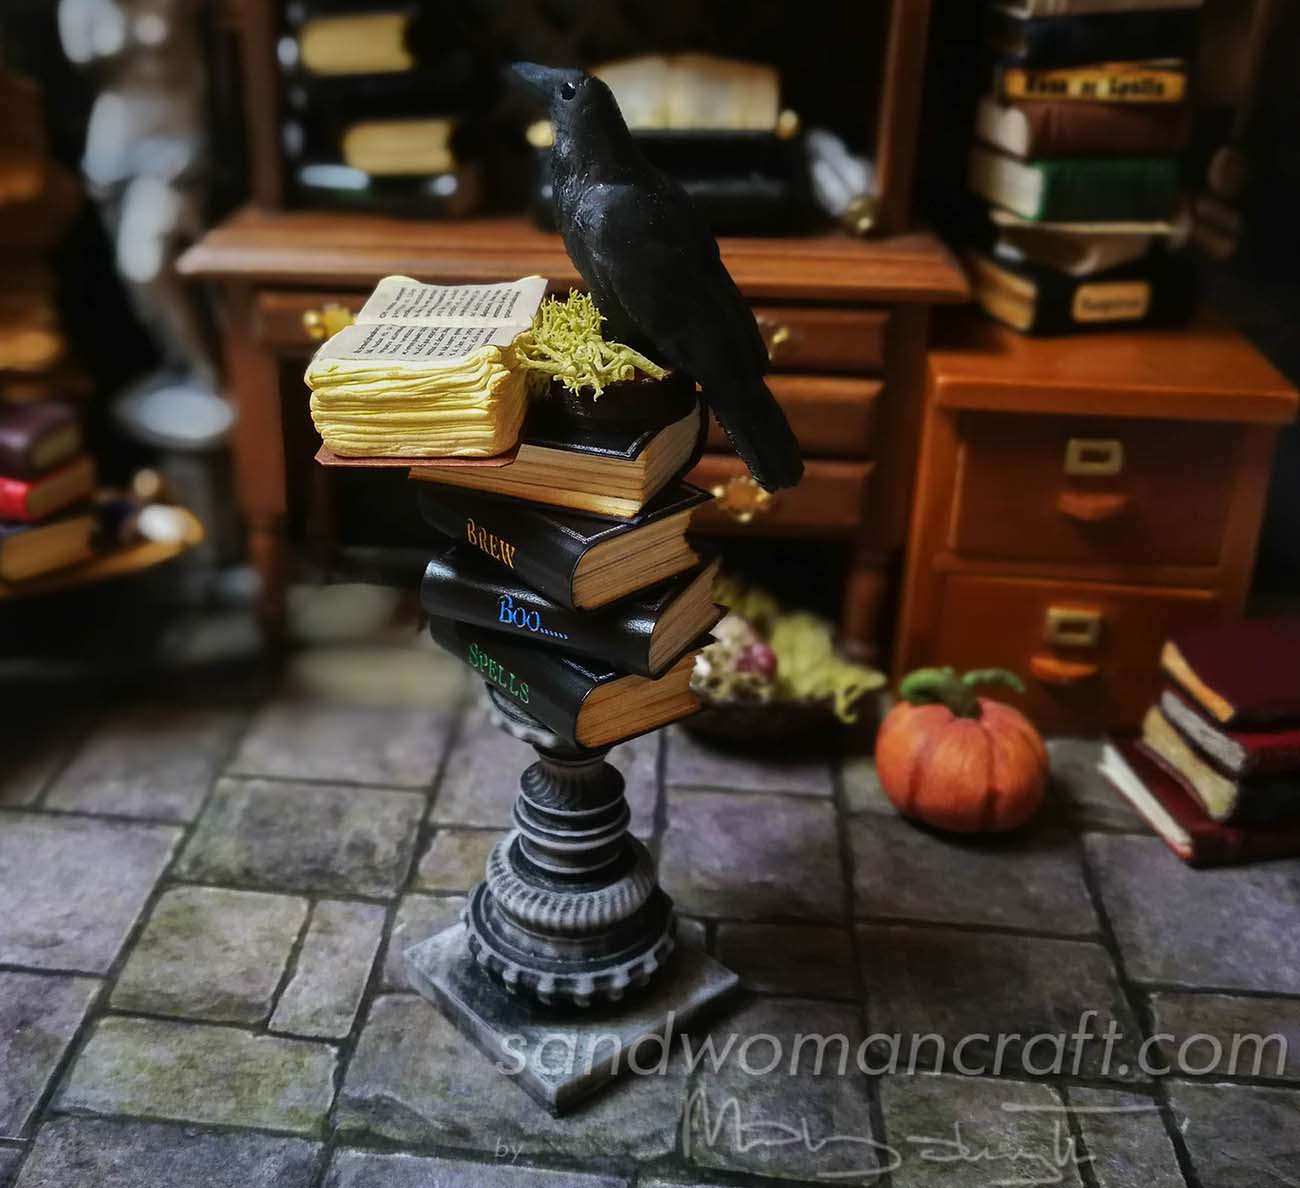 Stack of miniature books with a miniature open book and Crow at the top